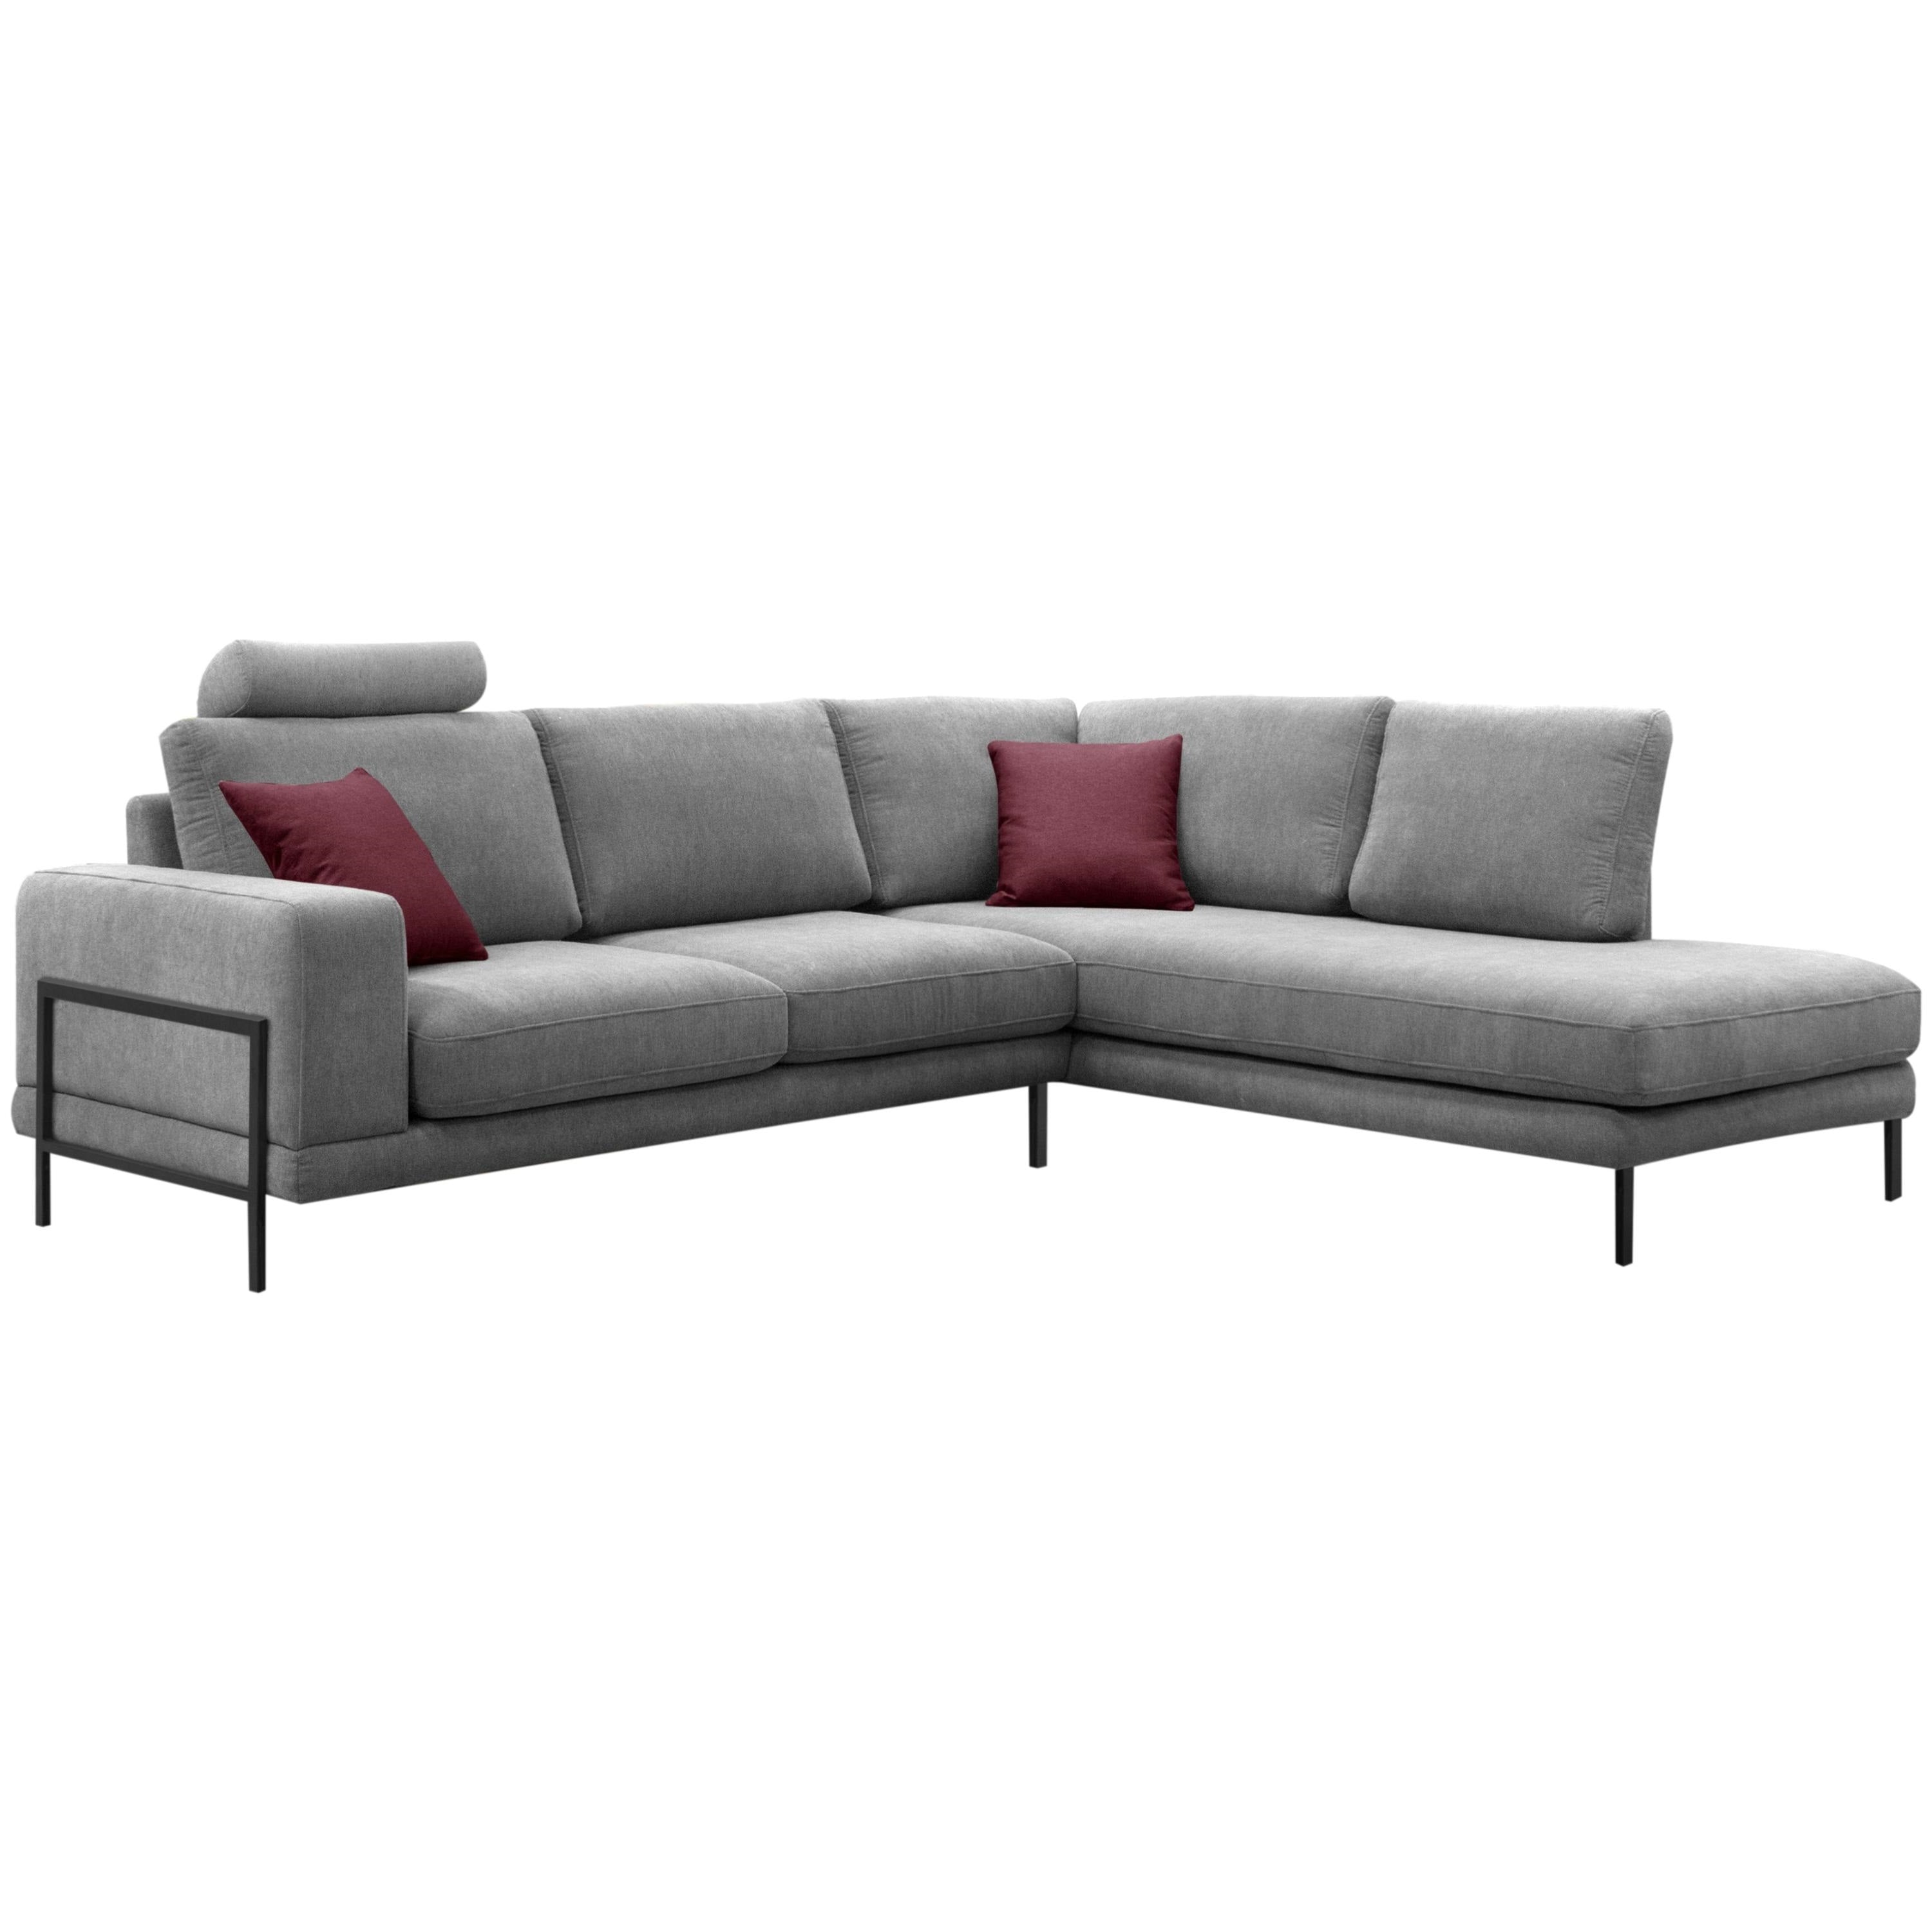 ViscoLogic FLAVIUS European Mid Century Sofa with Wooden Frame with High Resilience Foam and Sturdy Metal Legs (Left Orientation)